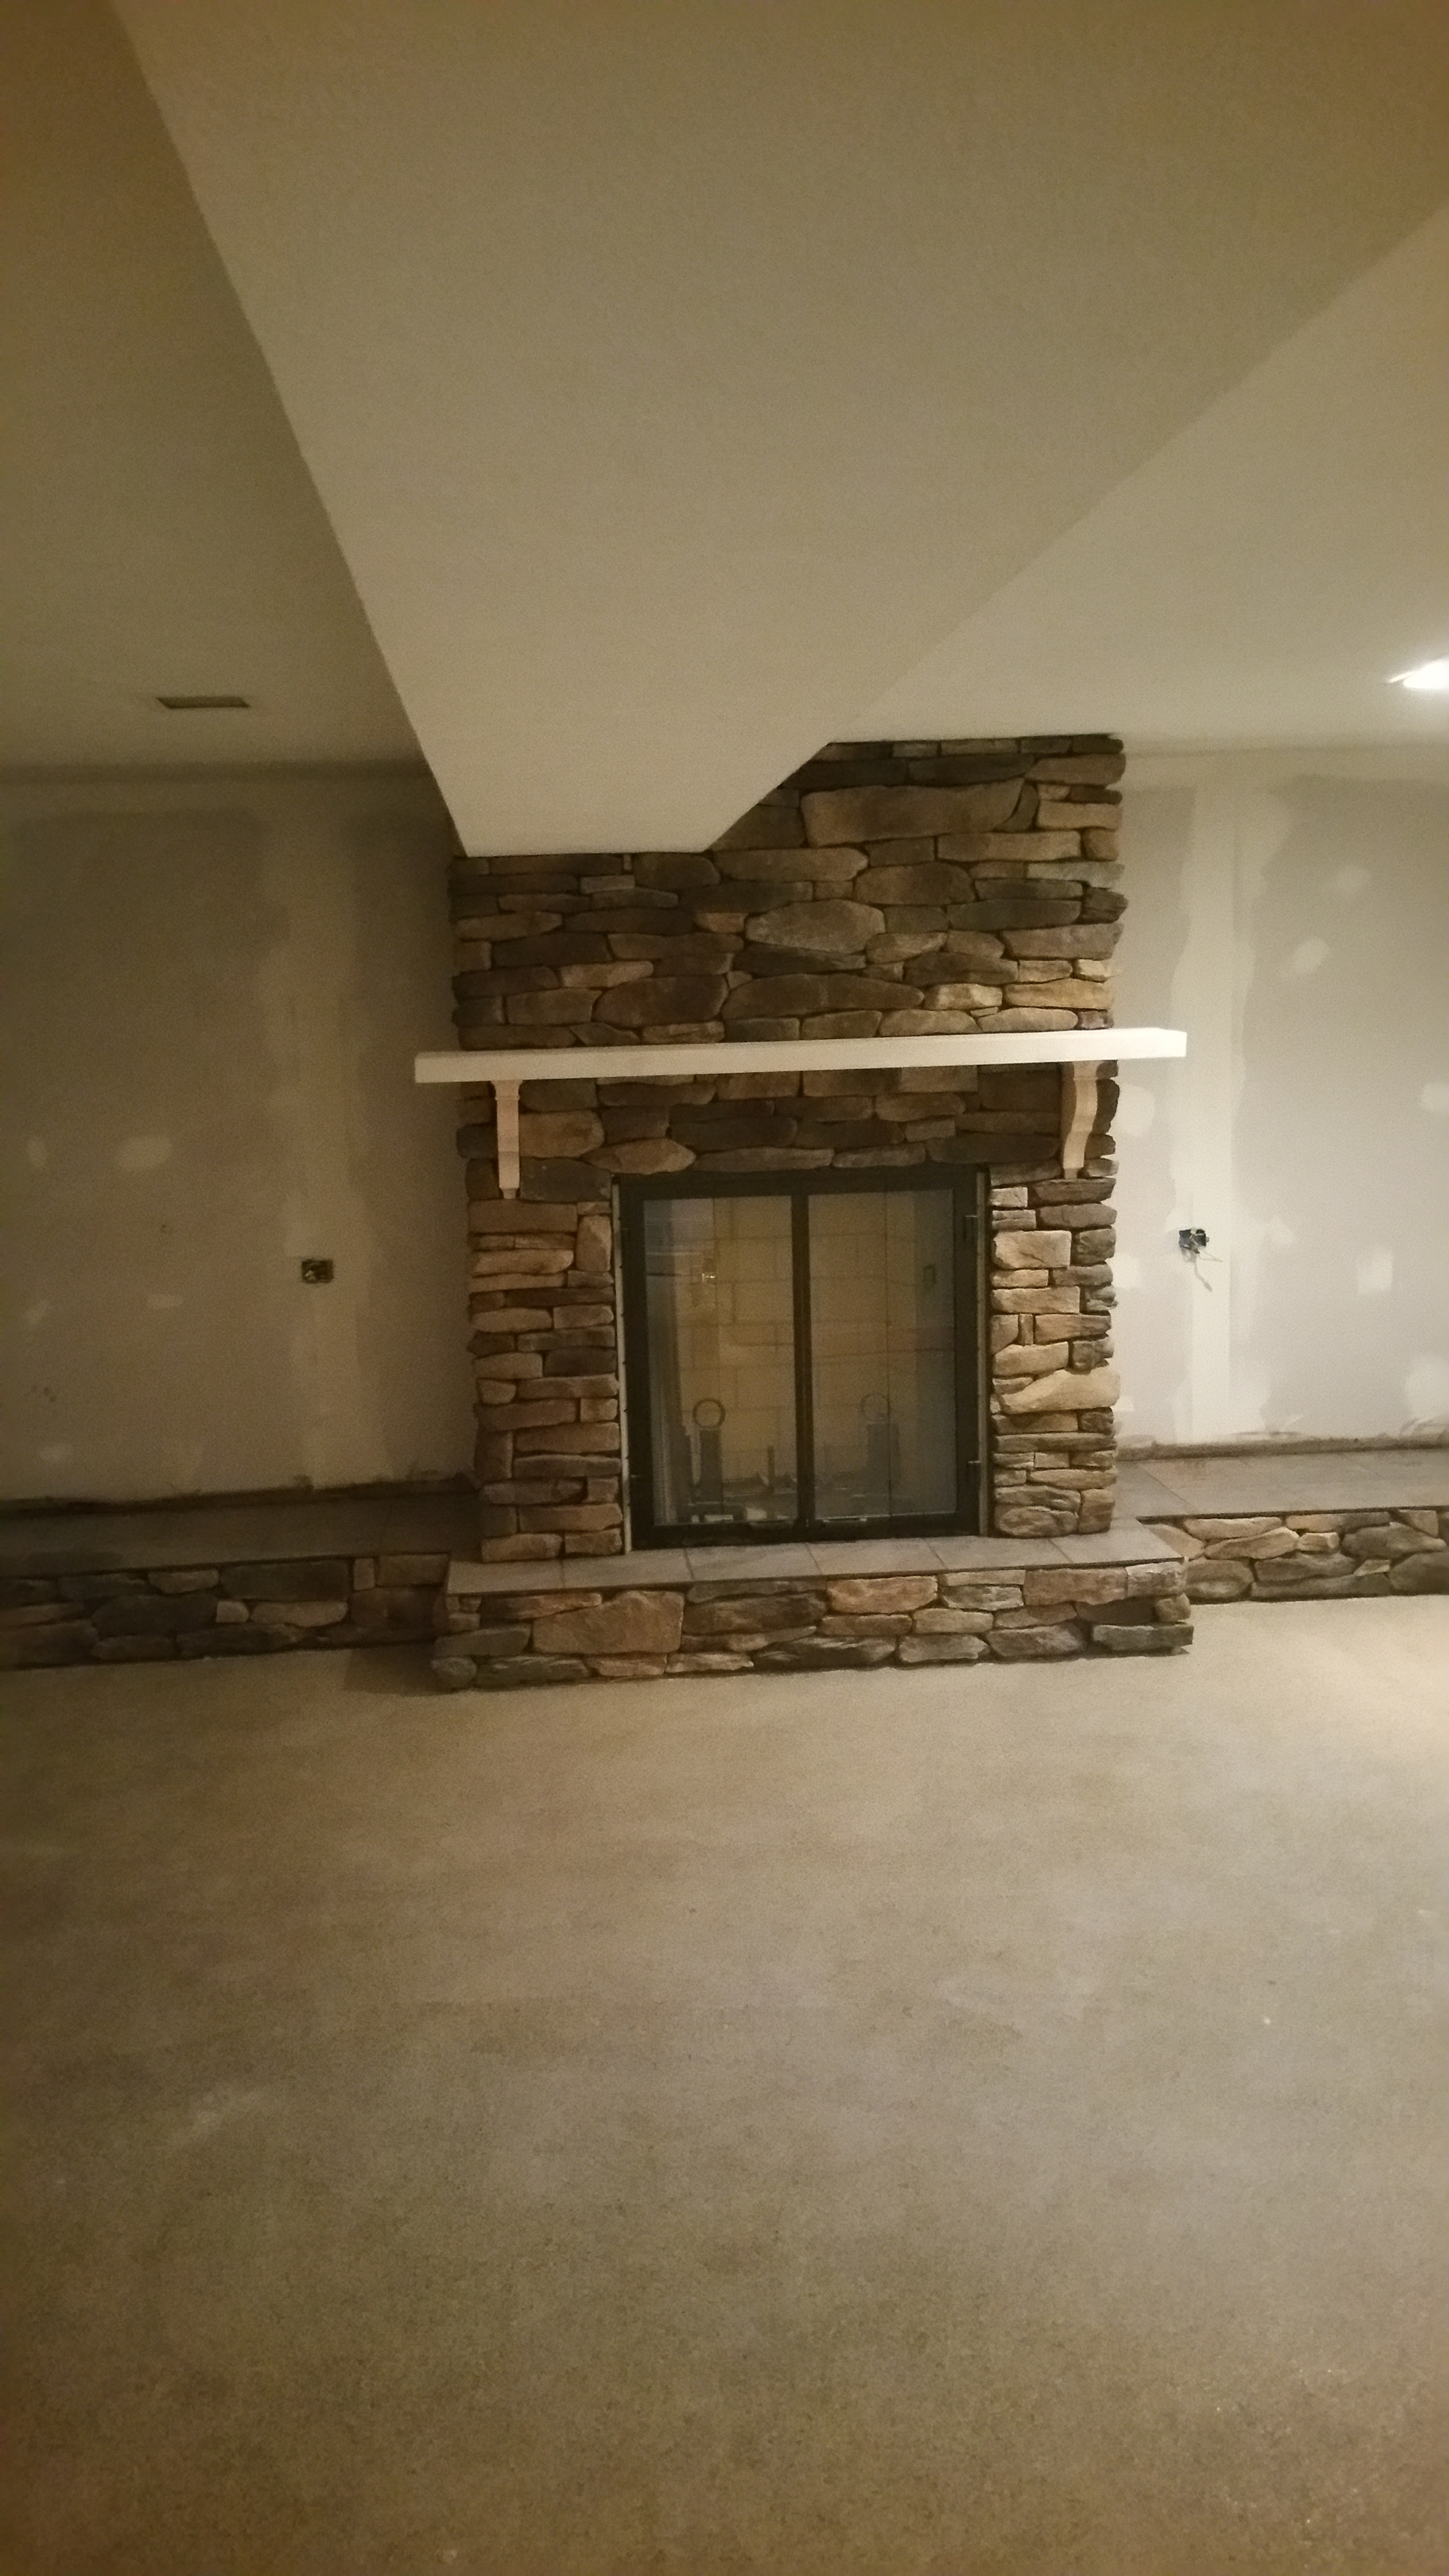 We removed the old Fireplace, and installed a new one. We did a dry stack stone veneer, and a limestone mantel with a tile hearth. While we were there we installed some drywall where the built-in book shelves were on either side if the fireplace.